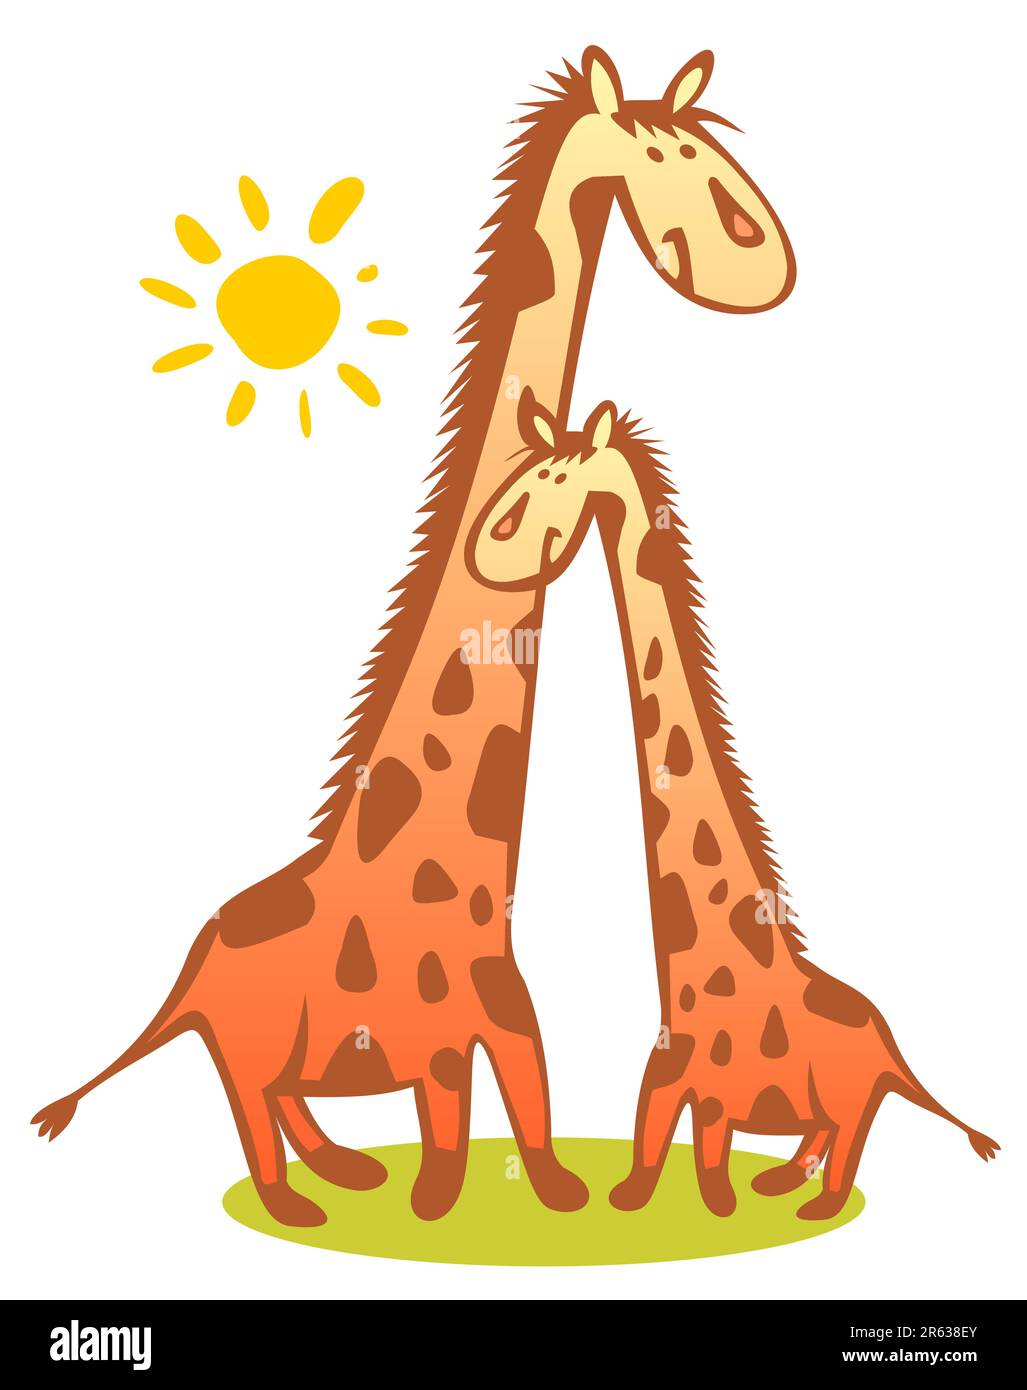 Two funny giraffes and sun isolated on a white background. Stock Vector